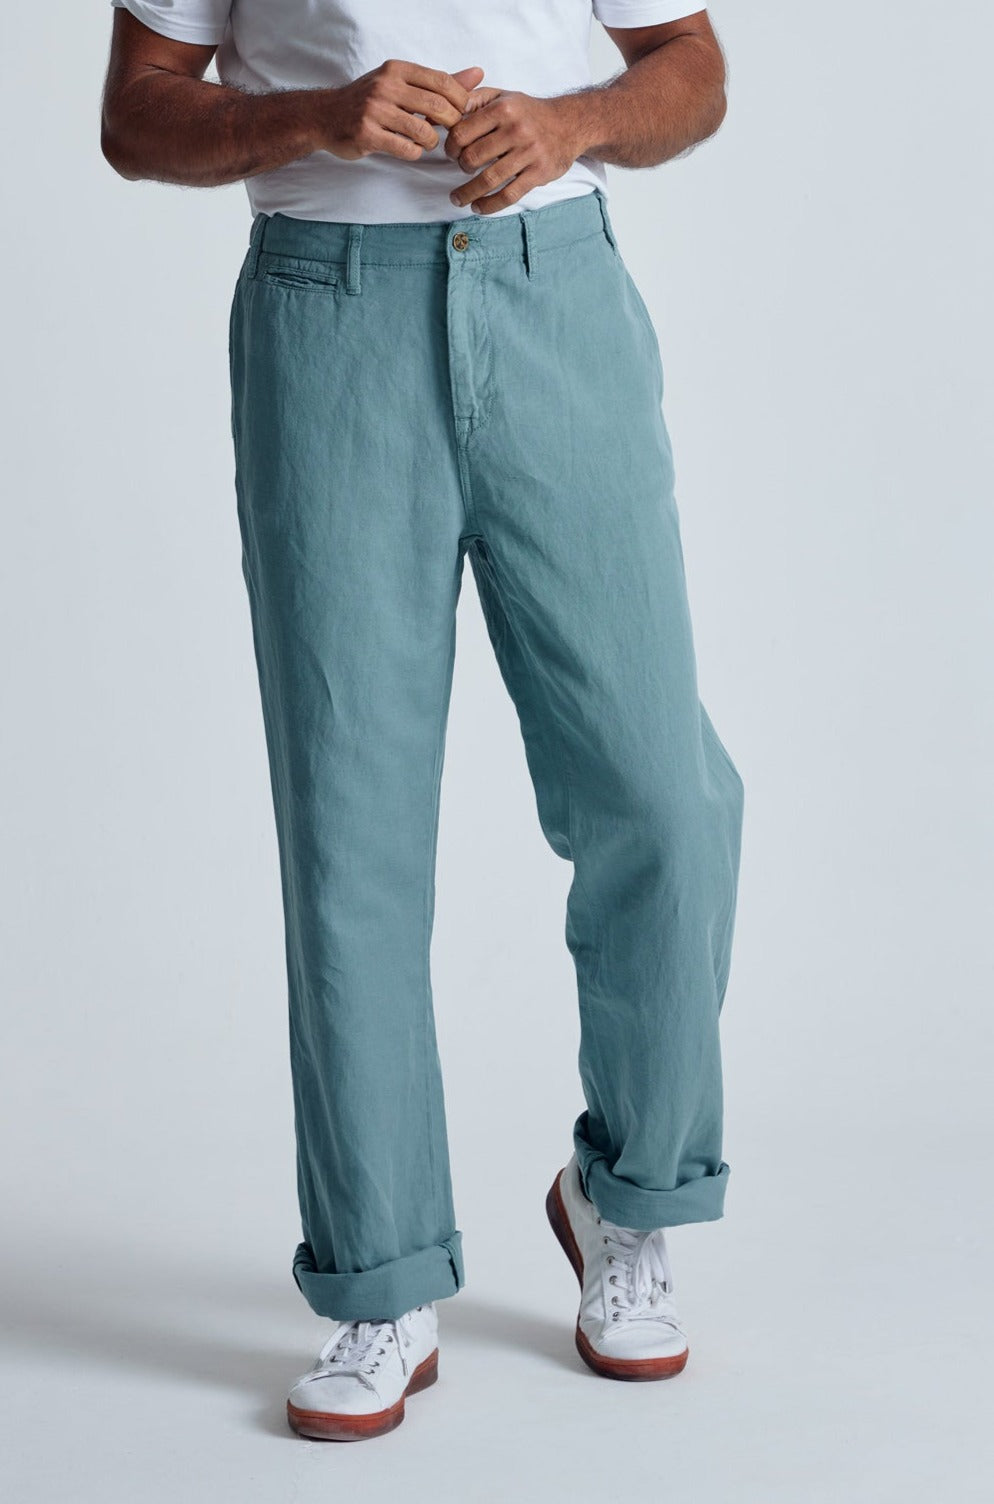 Retro-Blue The Bird Regular Fit Chino Trousers - GOTS Certified Organic Cotton and Linen